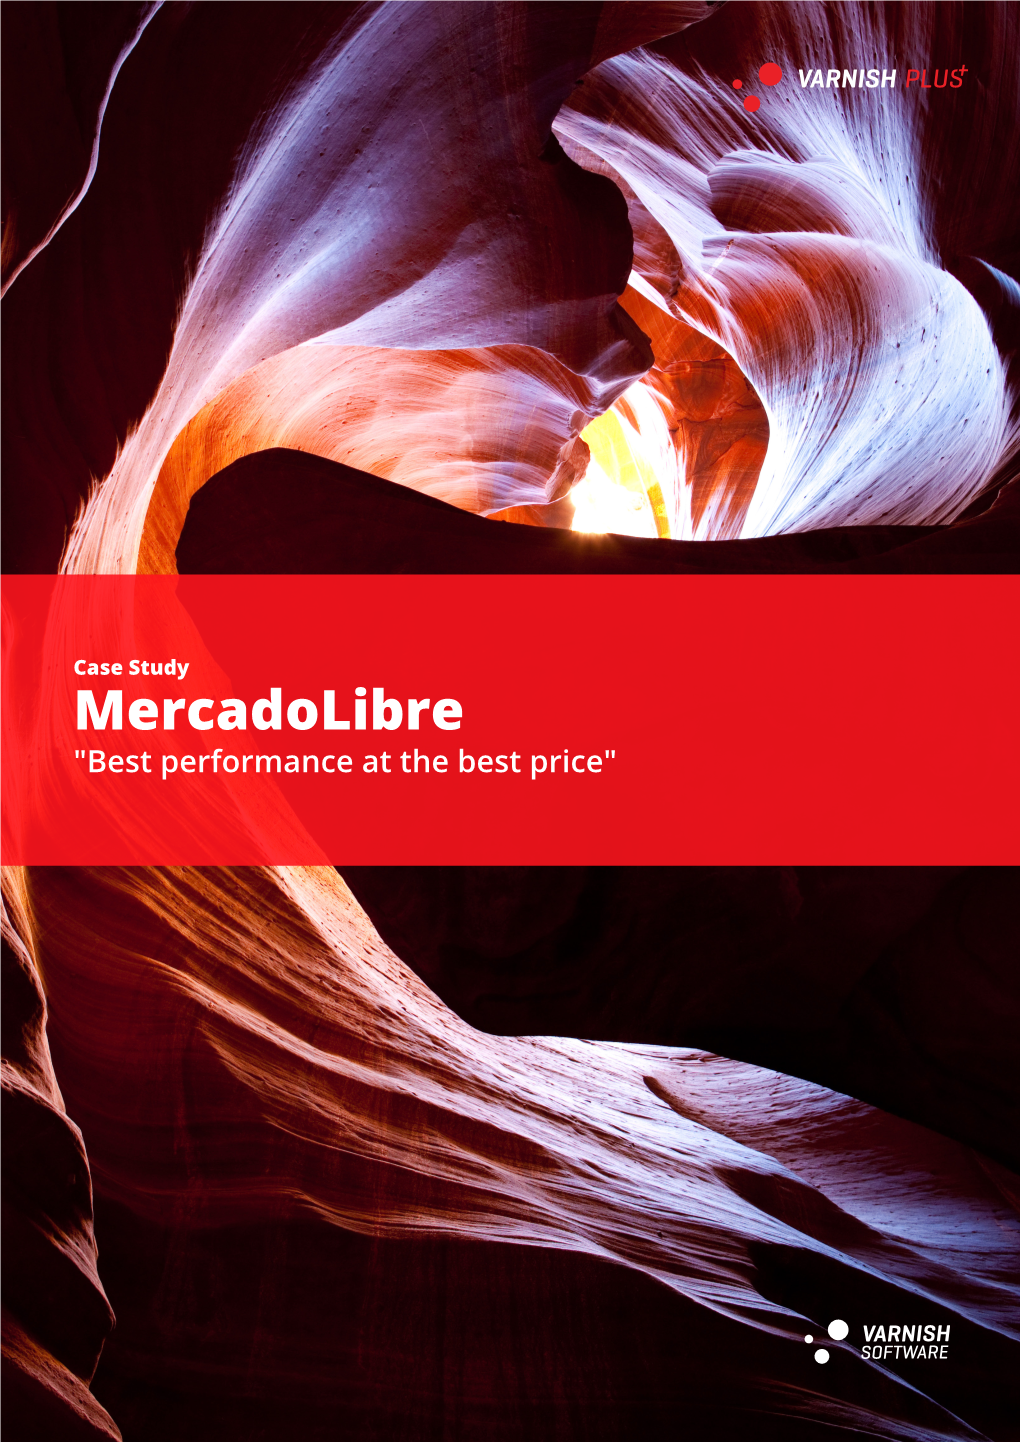 Mercadolibre "Best Performance at the Best Price"